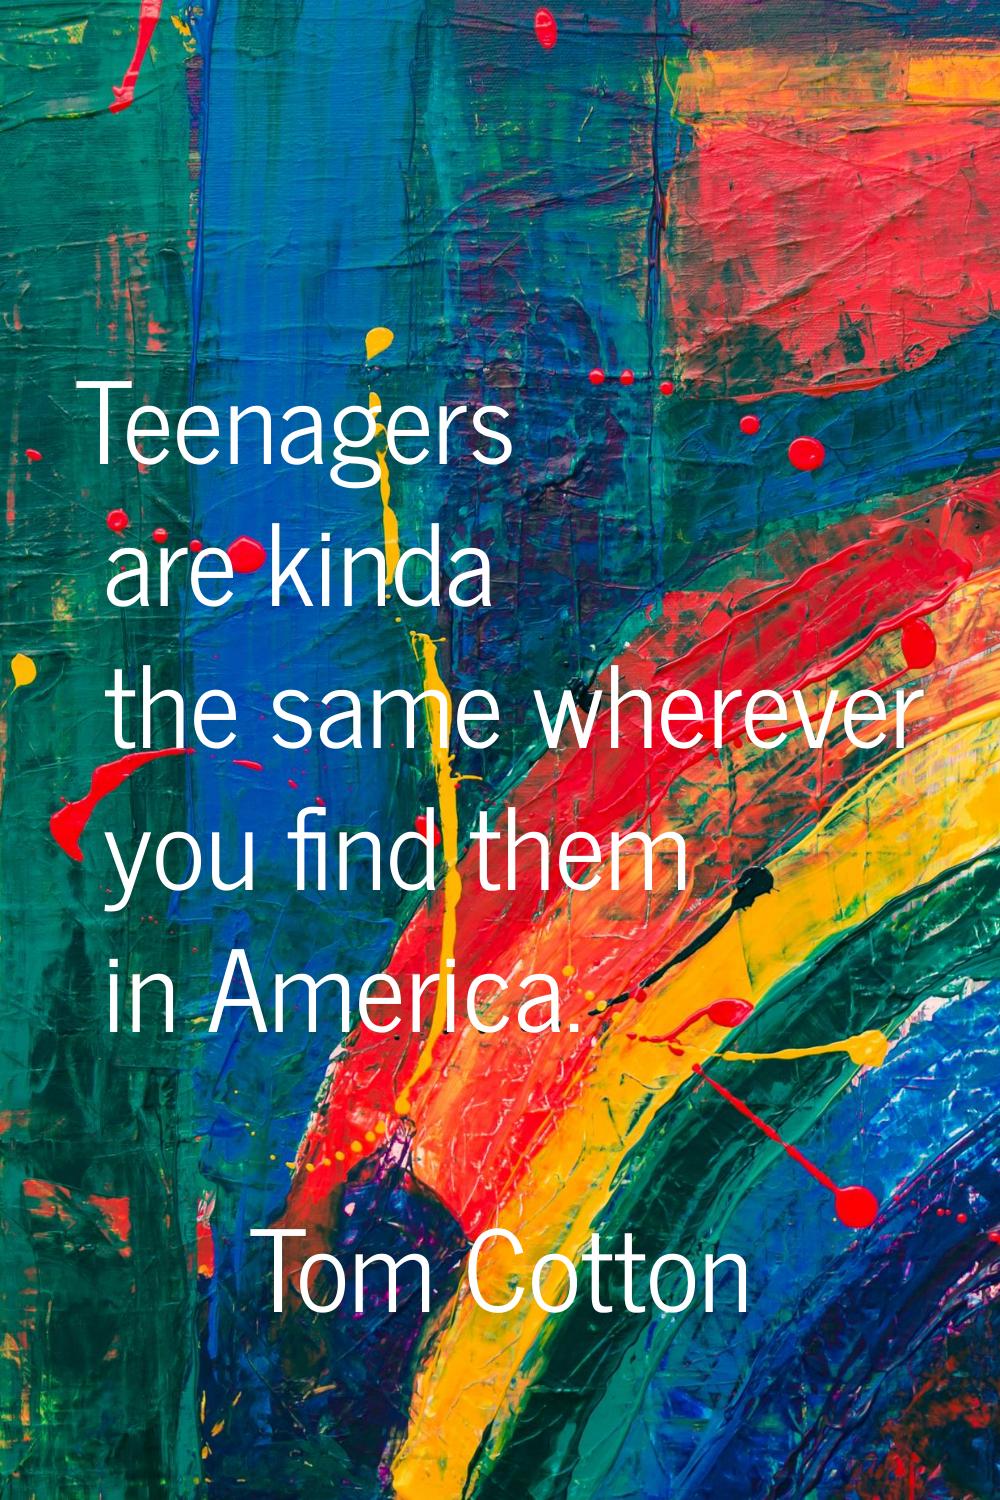 Teenagers are kinda the same wherever you find them in America.